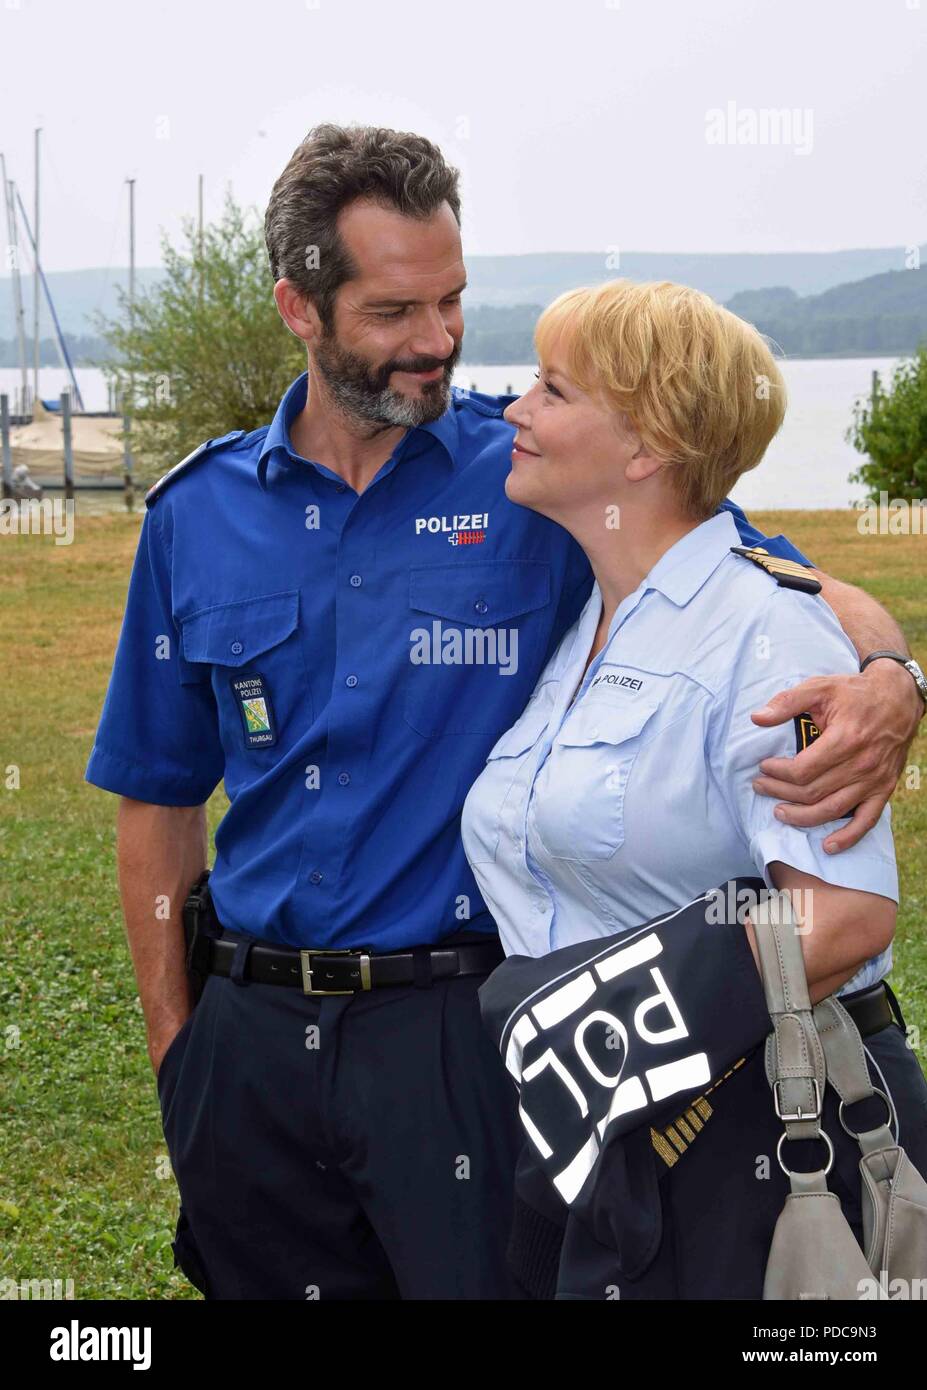 Radolfzell, Germany. 08th Aug, 2018. The actors Floriane Daniel (plays the role of Nele Fehrenbach) and Martin Rapold (plays the role of Captain Adrian Aubry) are the new lovers in the series 'WaPo Bodensee' (lit. Water Police Lake Constance), episode 'Seidenstrasse' (lit. silk street). The series is to be broadcasted on the German TV channel ARD at the beginning of 2019 on Tuesdays at 6.50 p.m. Credit: Ursula Düren/dpa/Alamy Live News Stock Photo